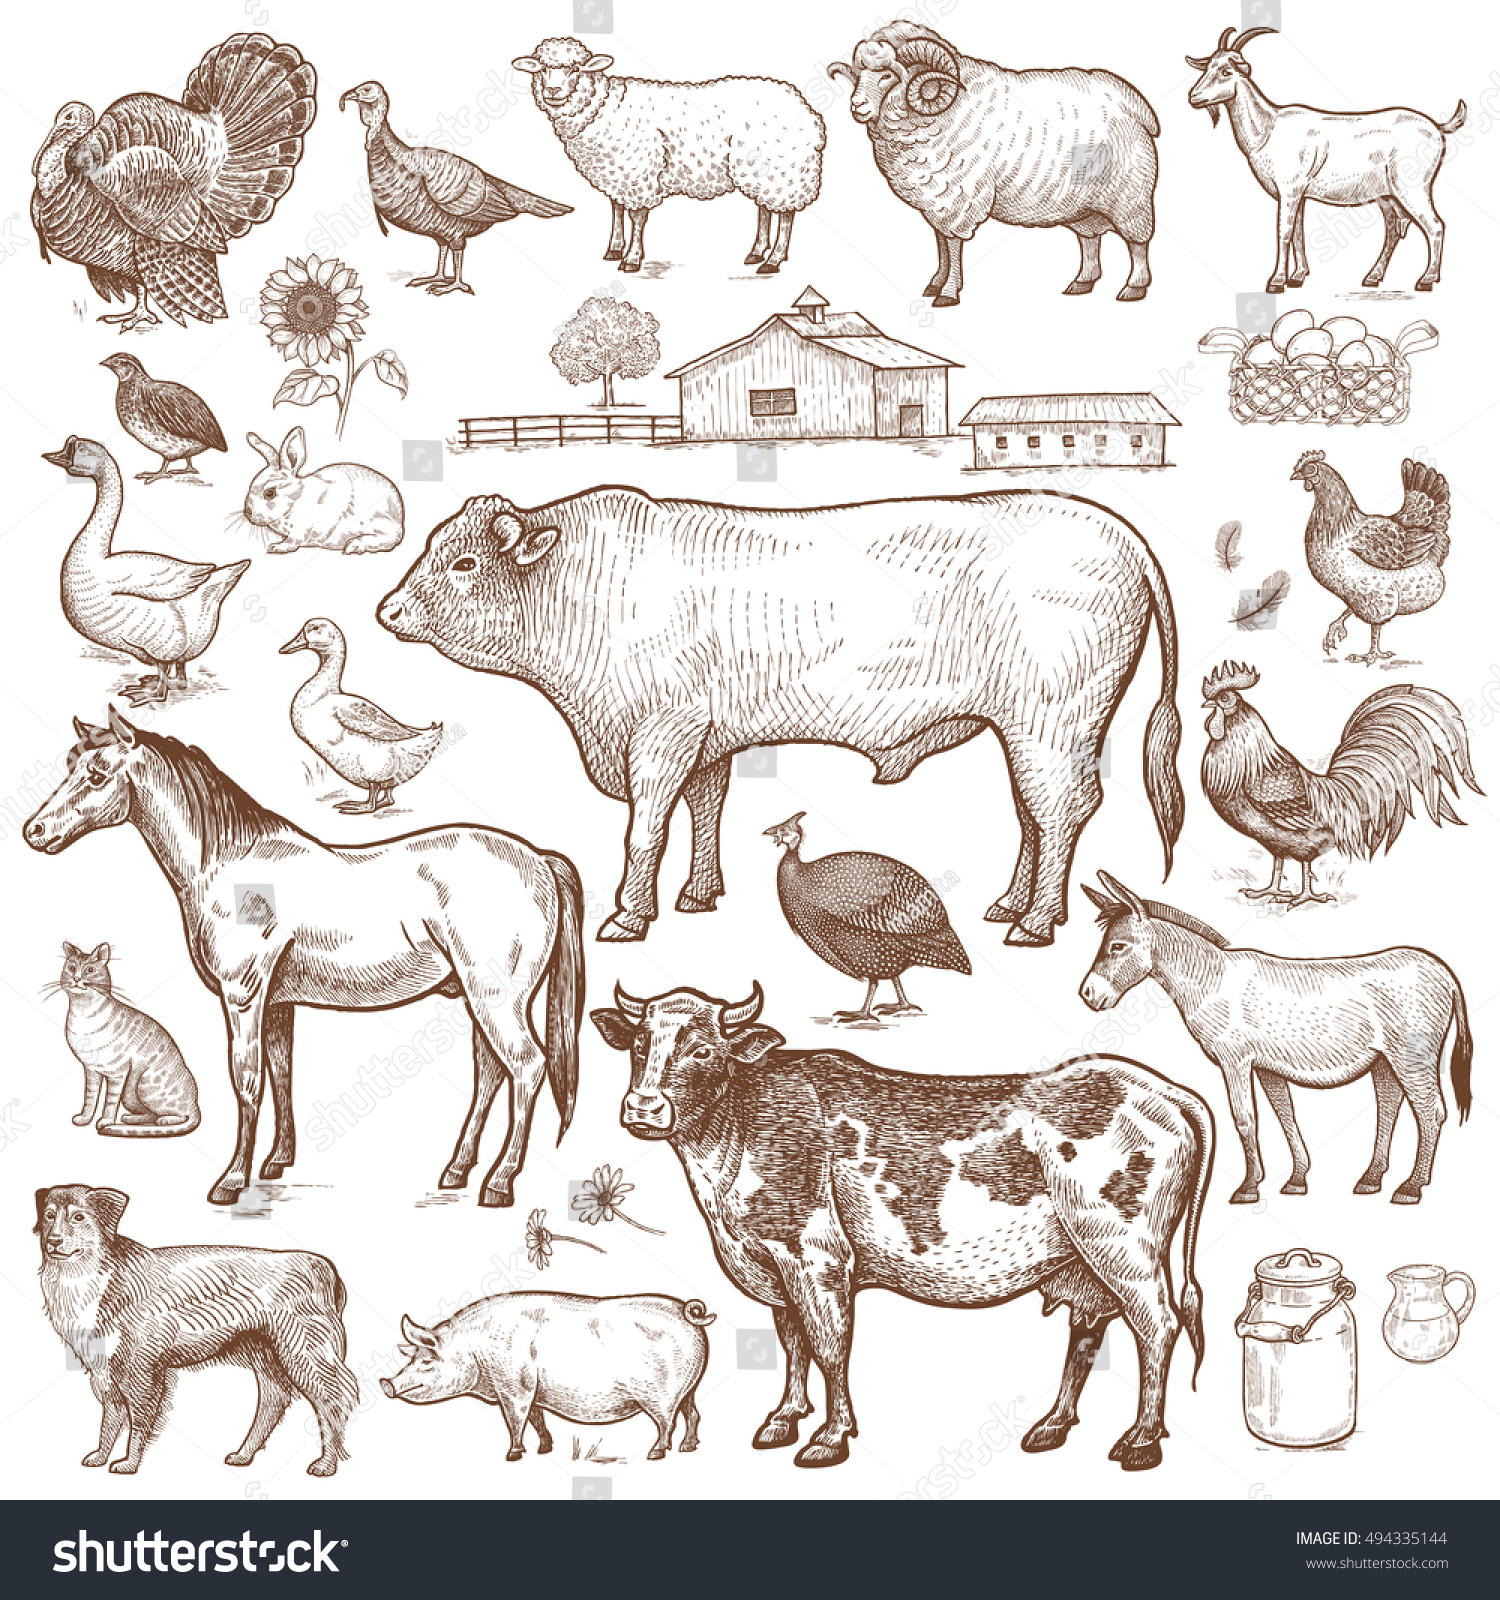 Vector large set  farm theme. Animals cattle, poultry, pets, landscape. Objects of nature isolated on white background. Drawings for text illustration, decoupage, design covers, signage, posters. #494335144